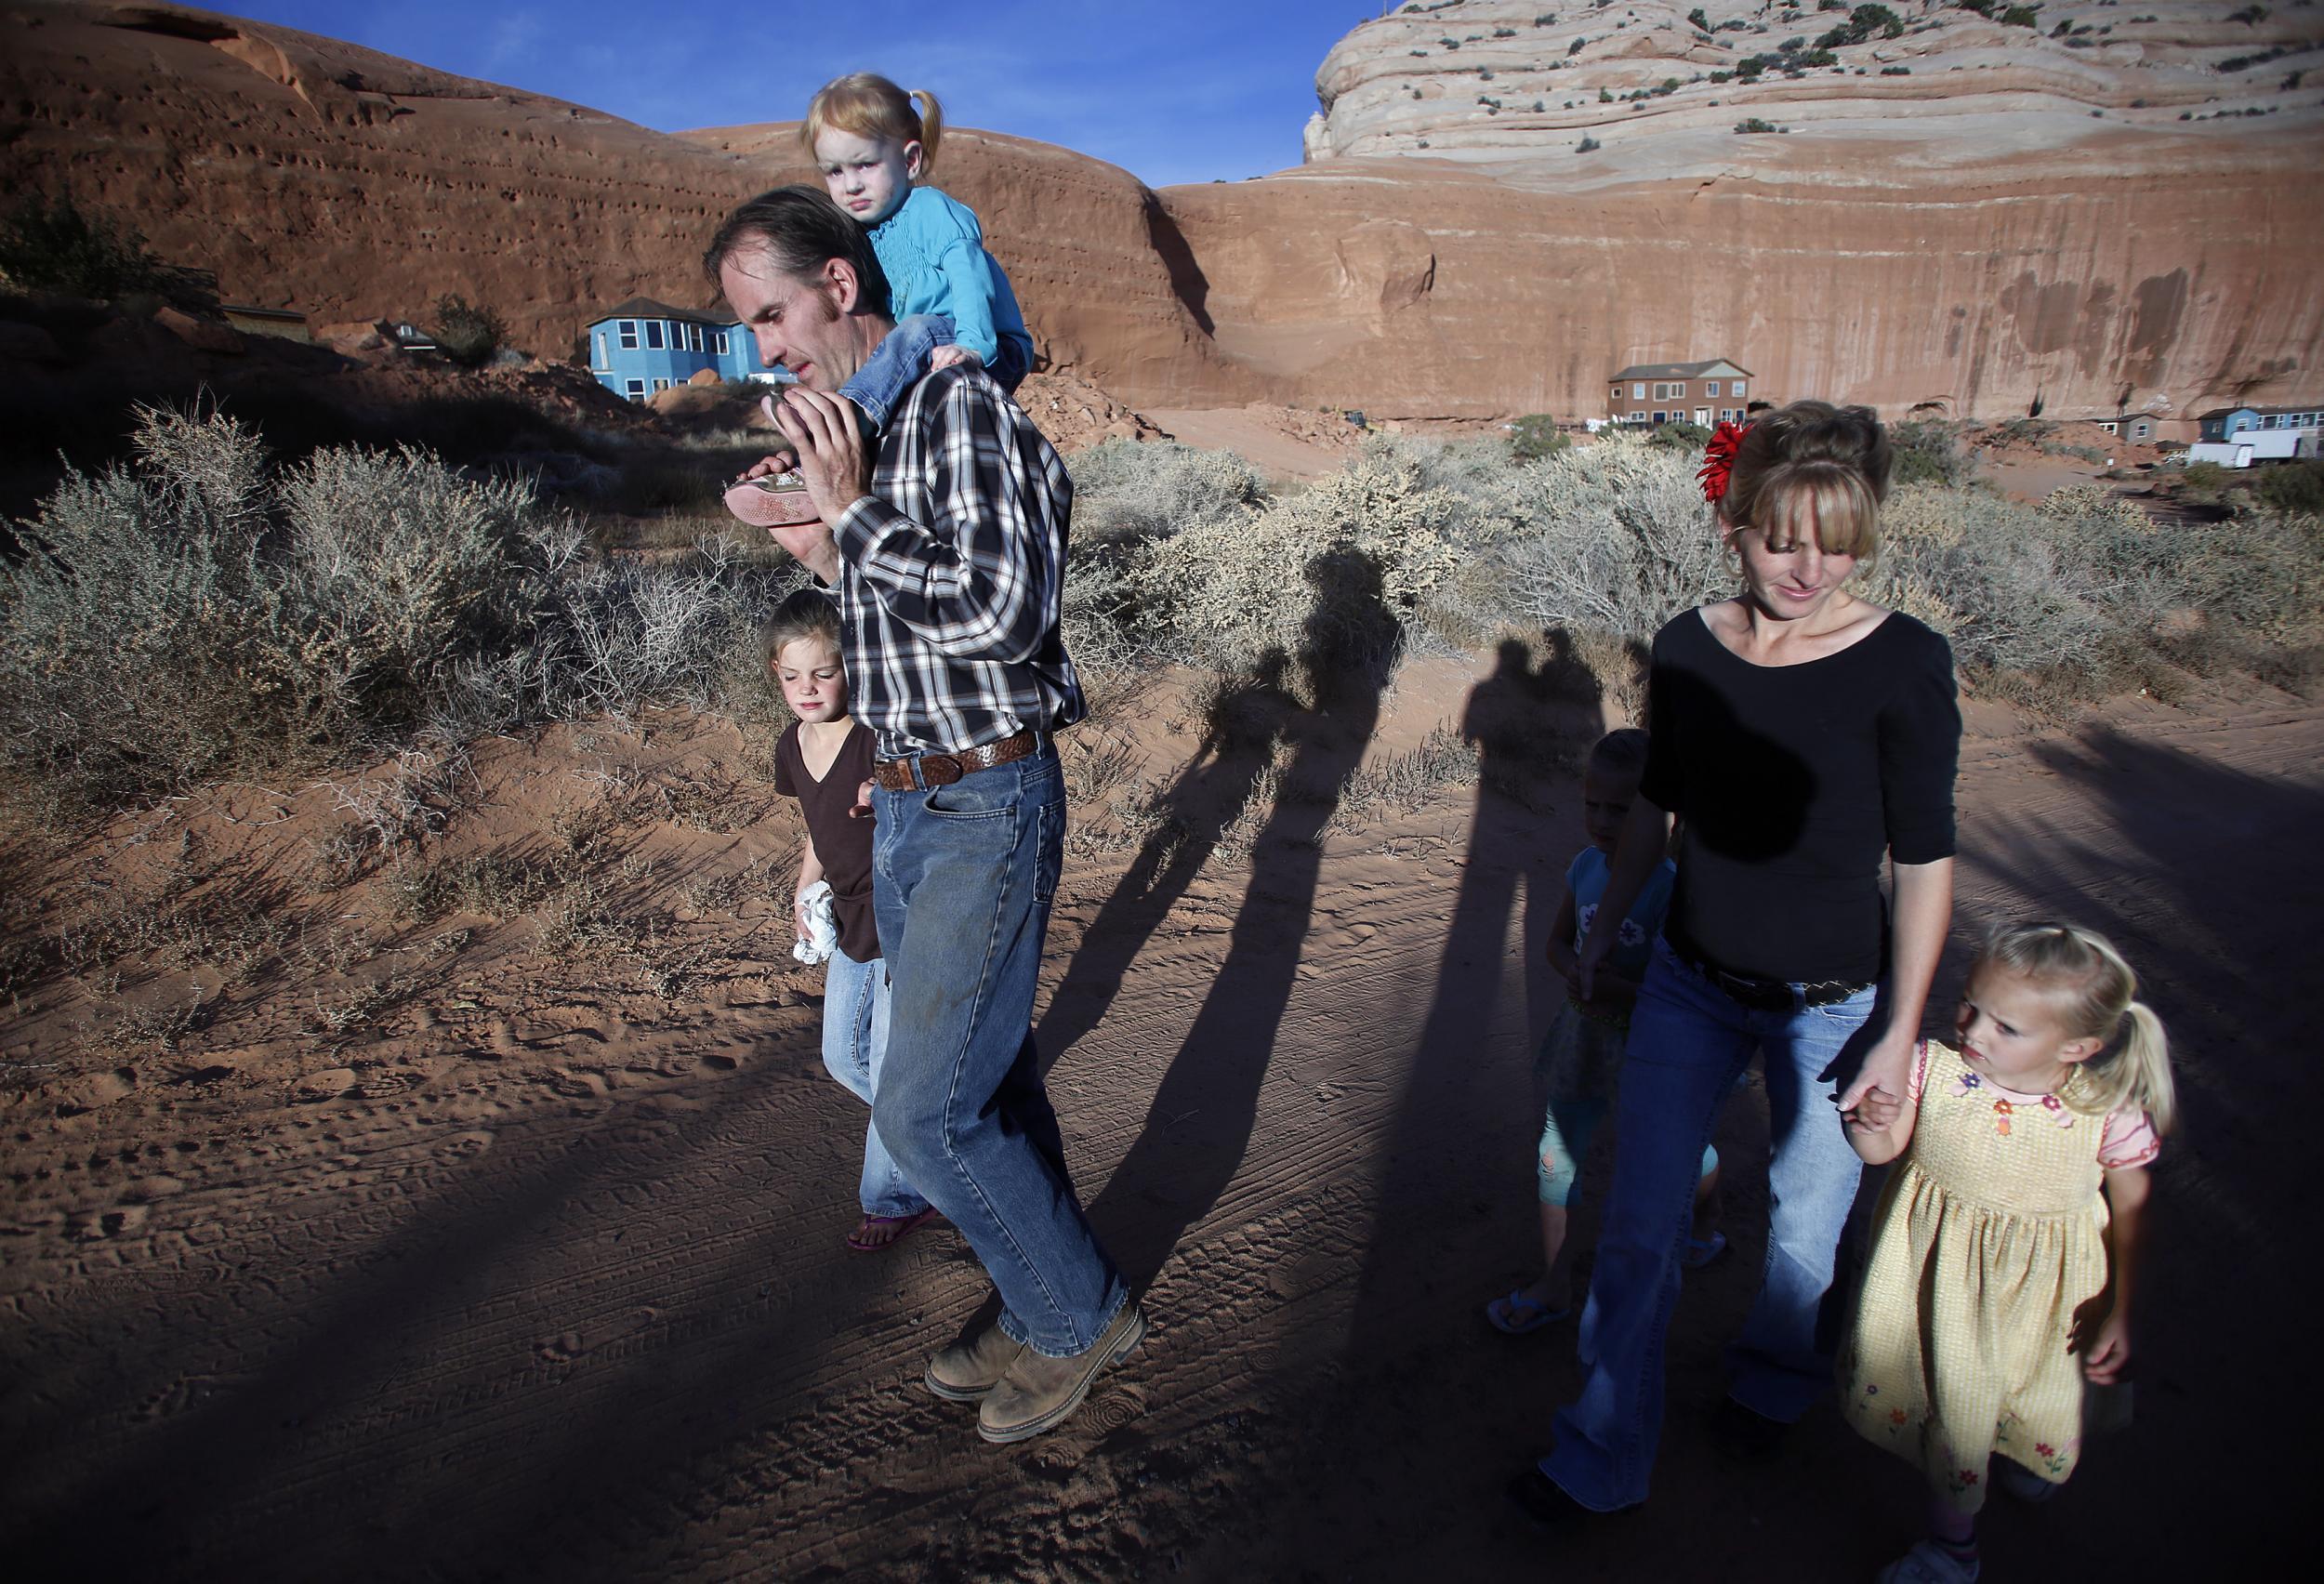 Enoch Foster, a fundamentalist Mormon practicing polygamy, walks with his first wife Catrina Foster and several of his 13 children